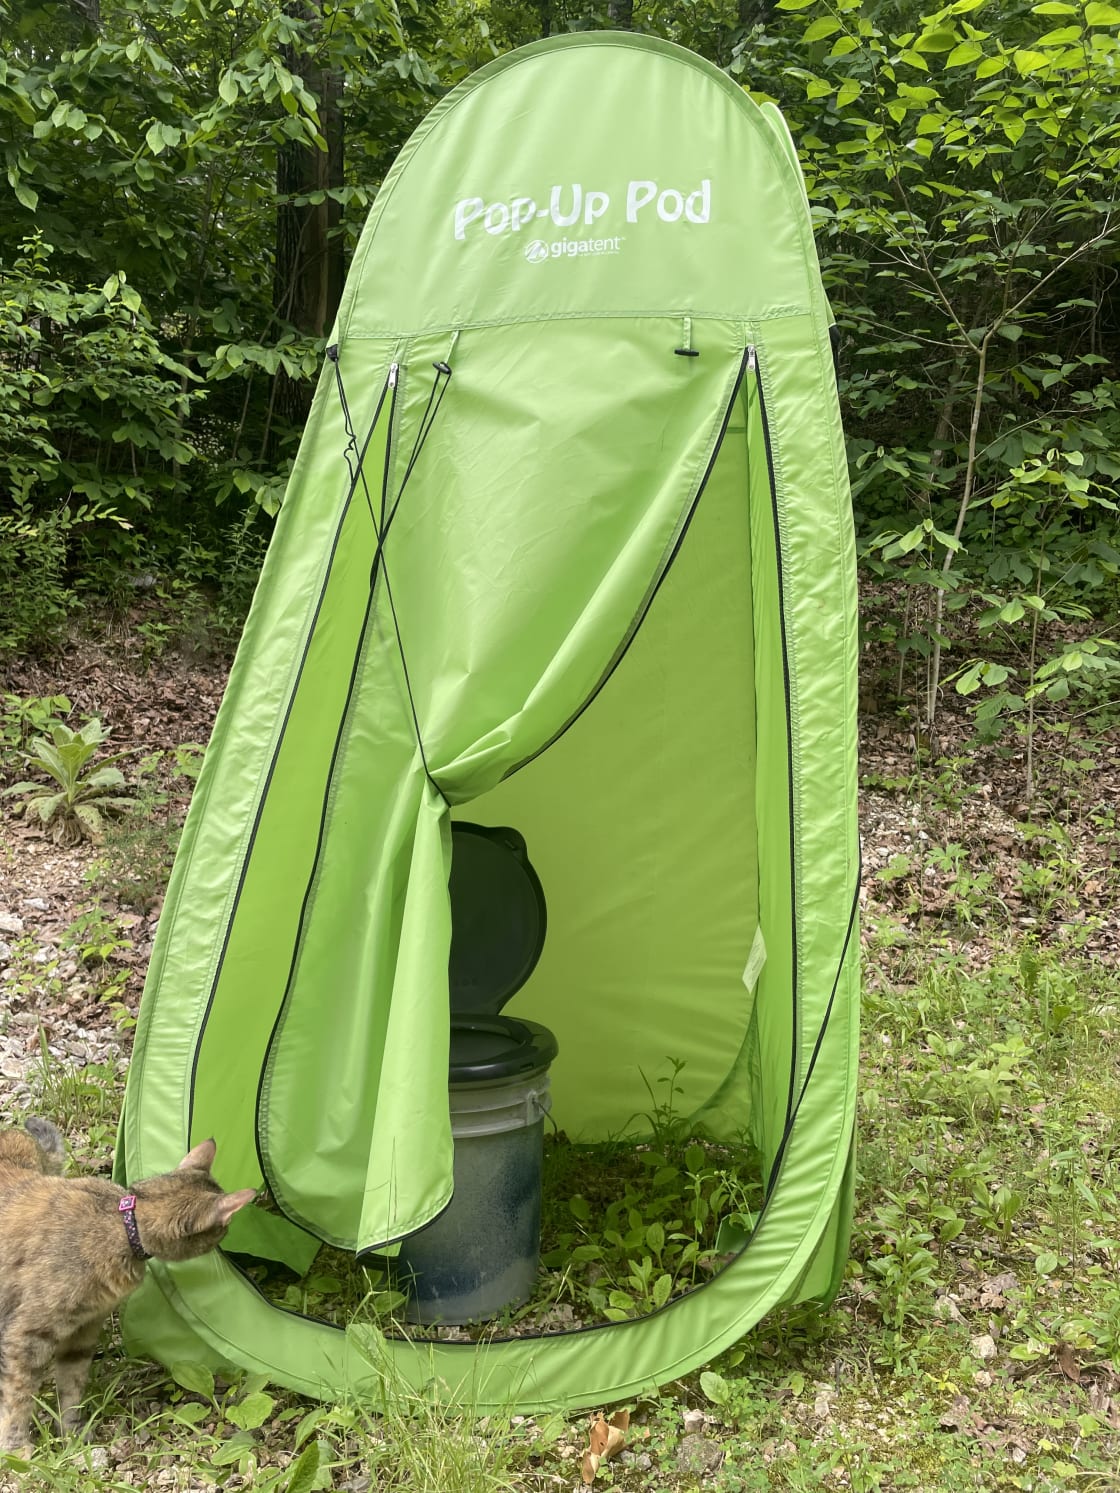 Privacy tent with bucket and toilet seat. Please use appropriately, and pack it out at the end of your stay. 